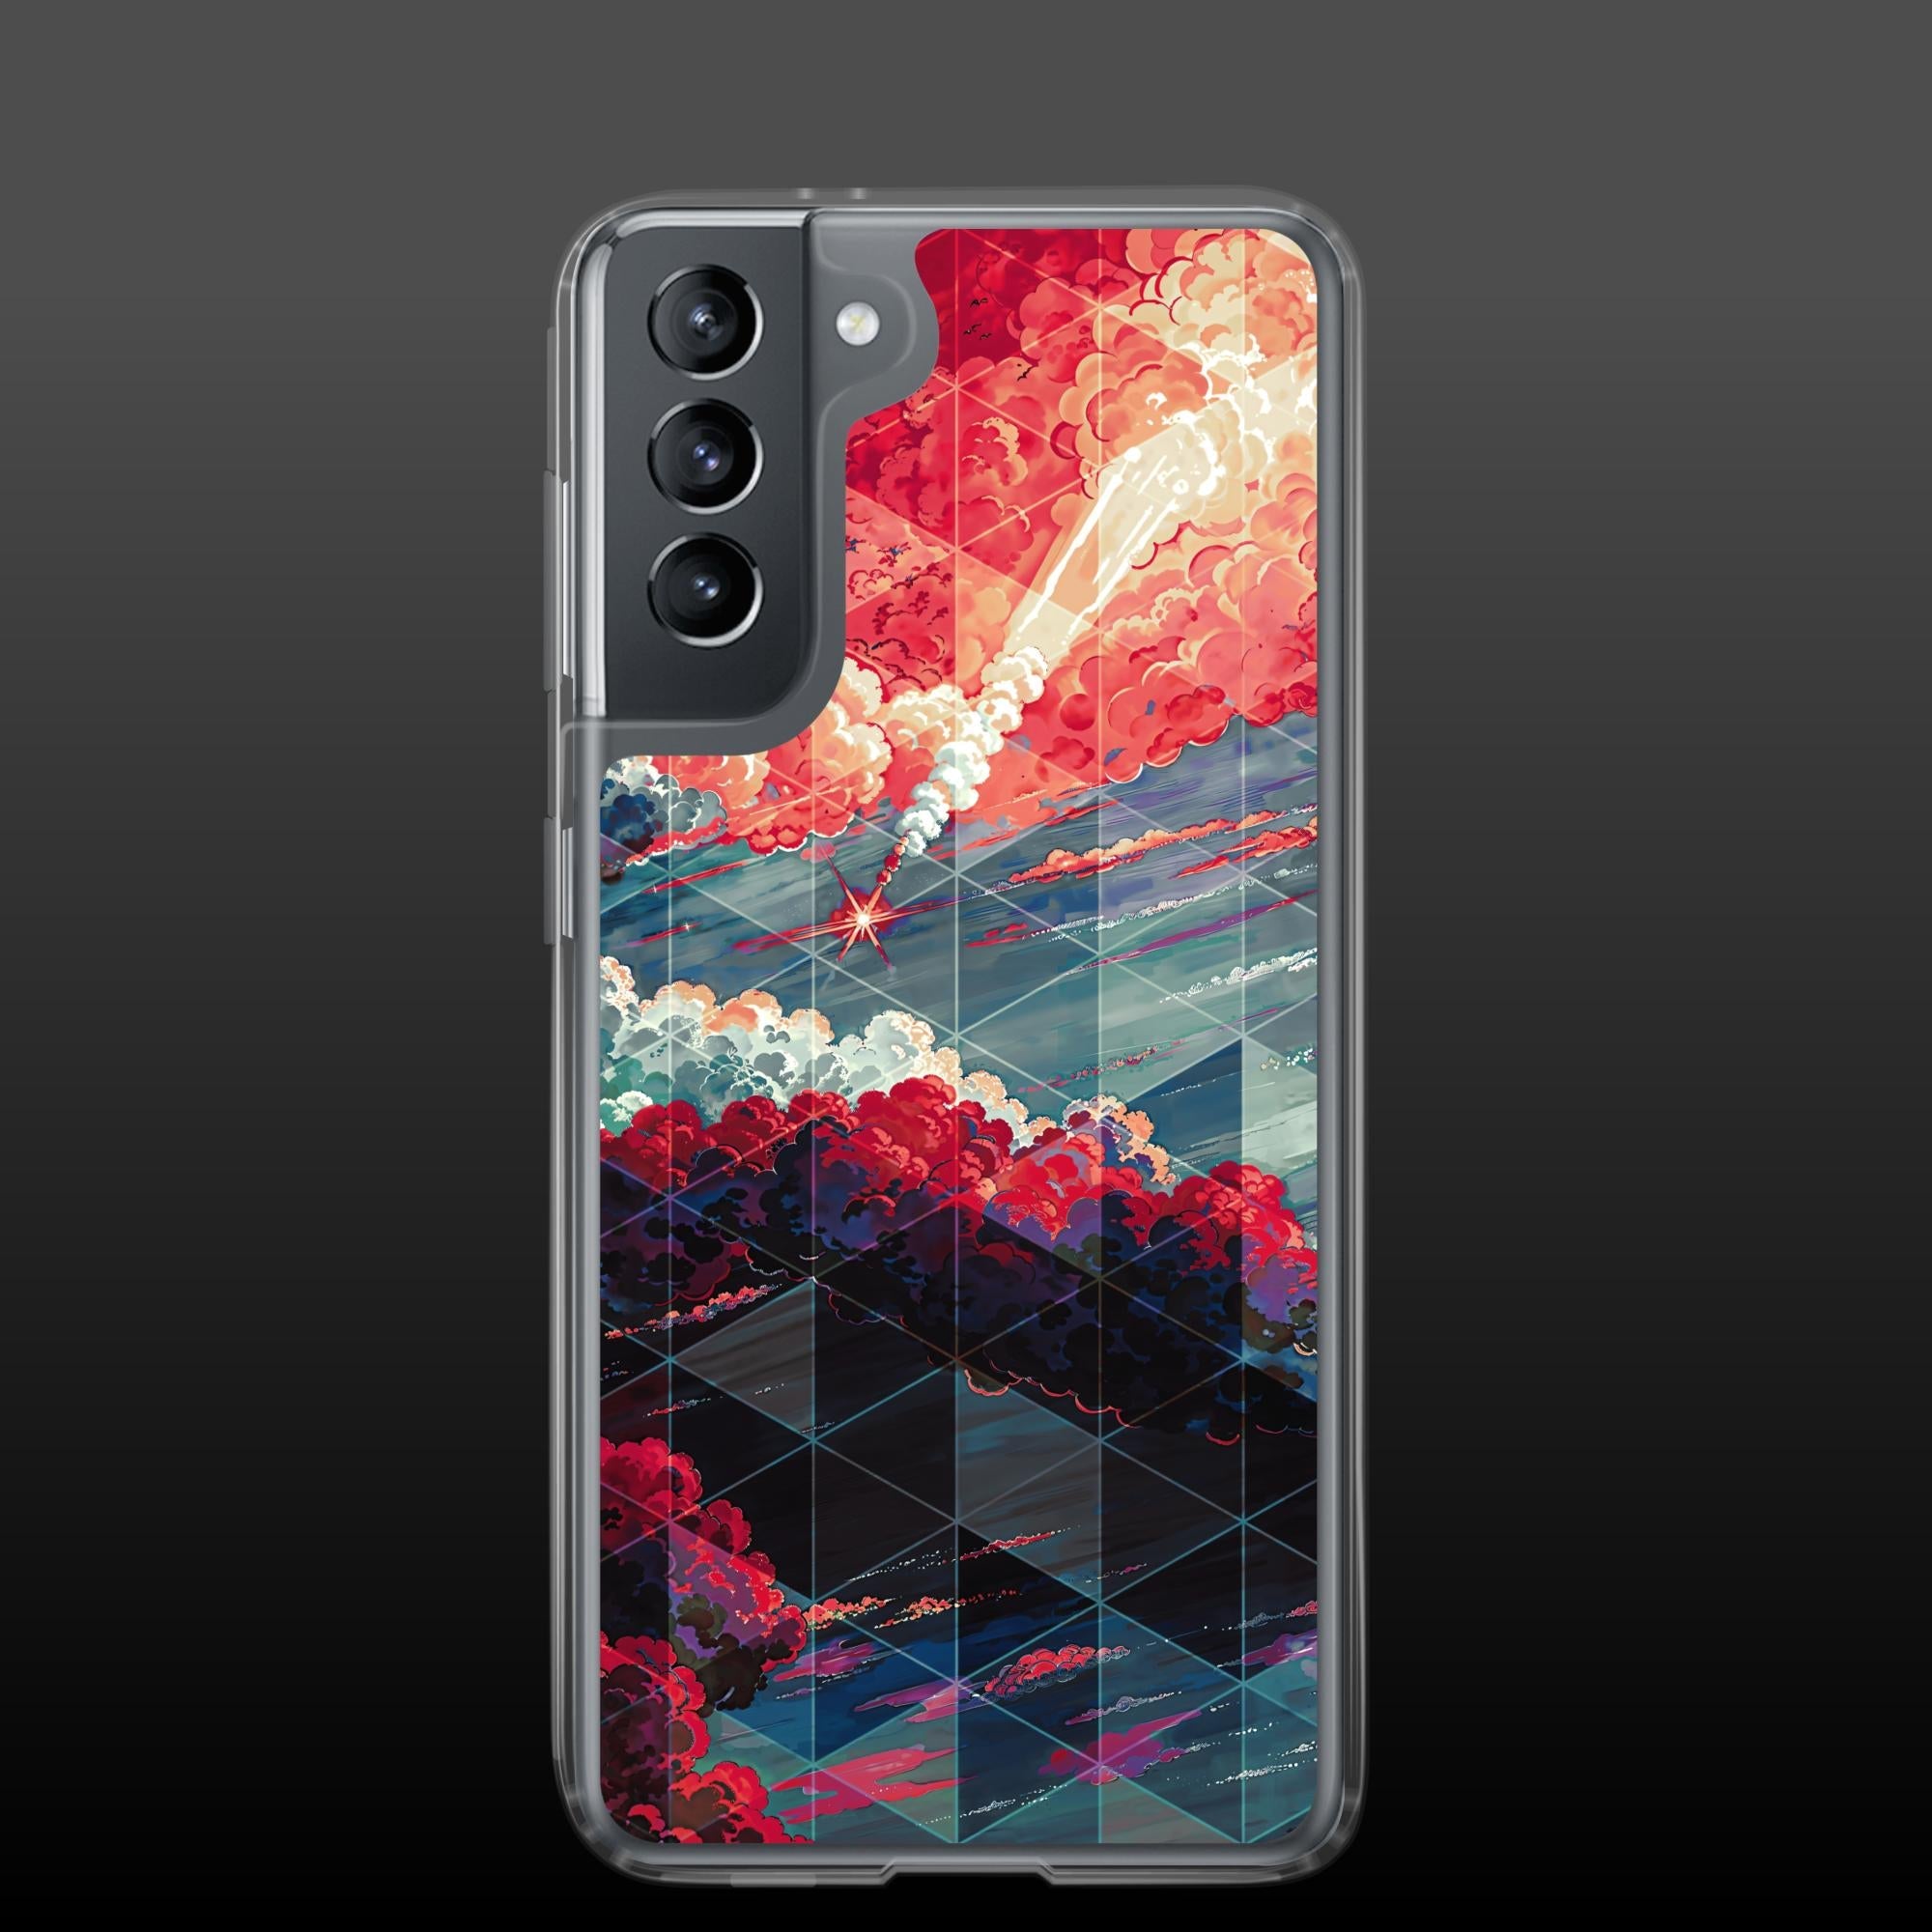 "Falling cataclysm" clear samsung case - Clear samsung case - Ever colorful